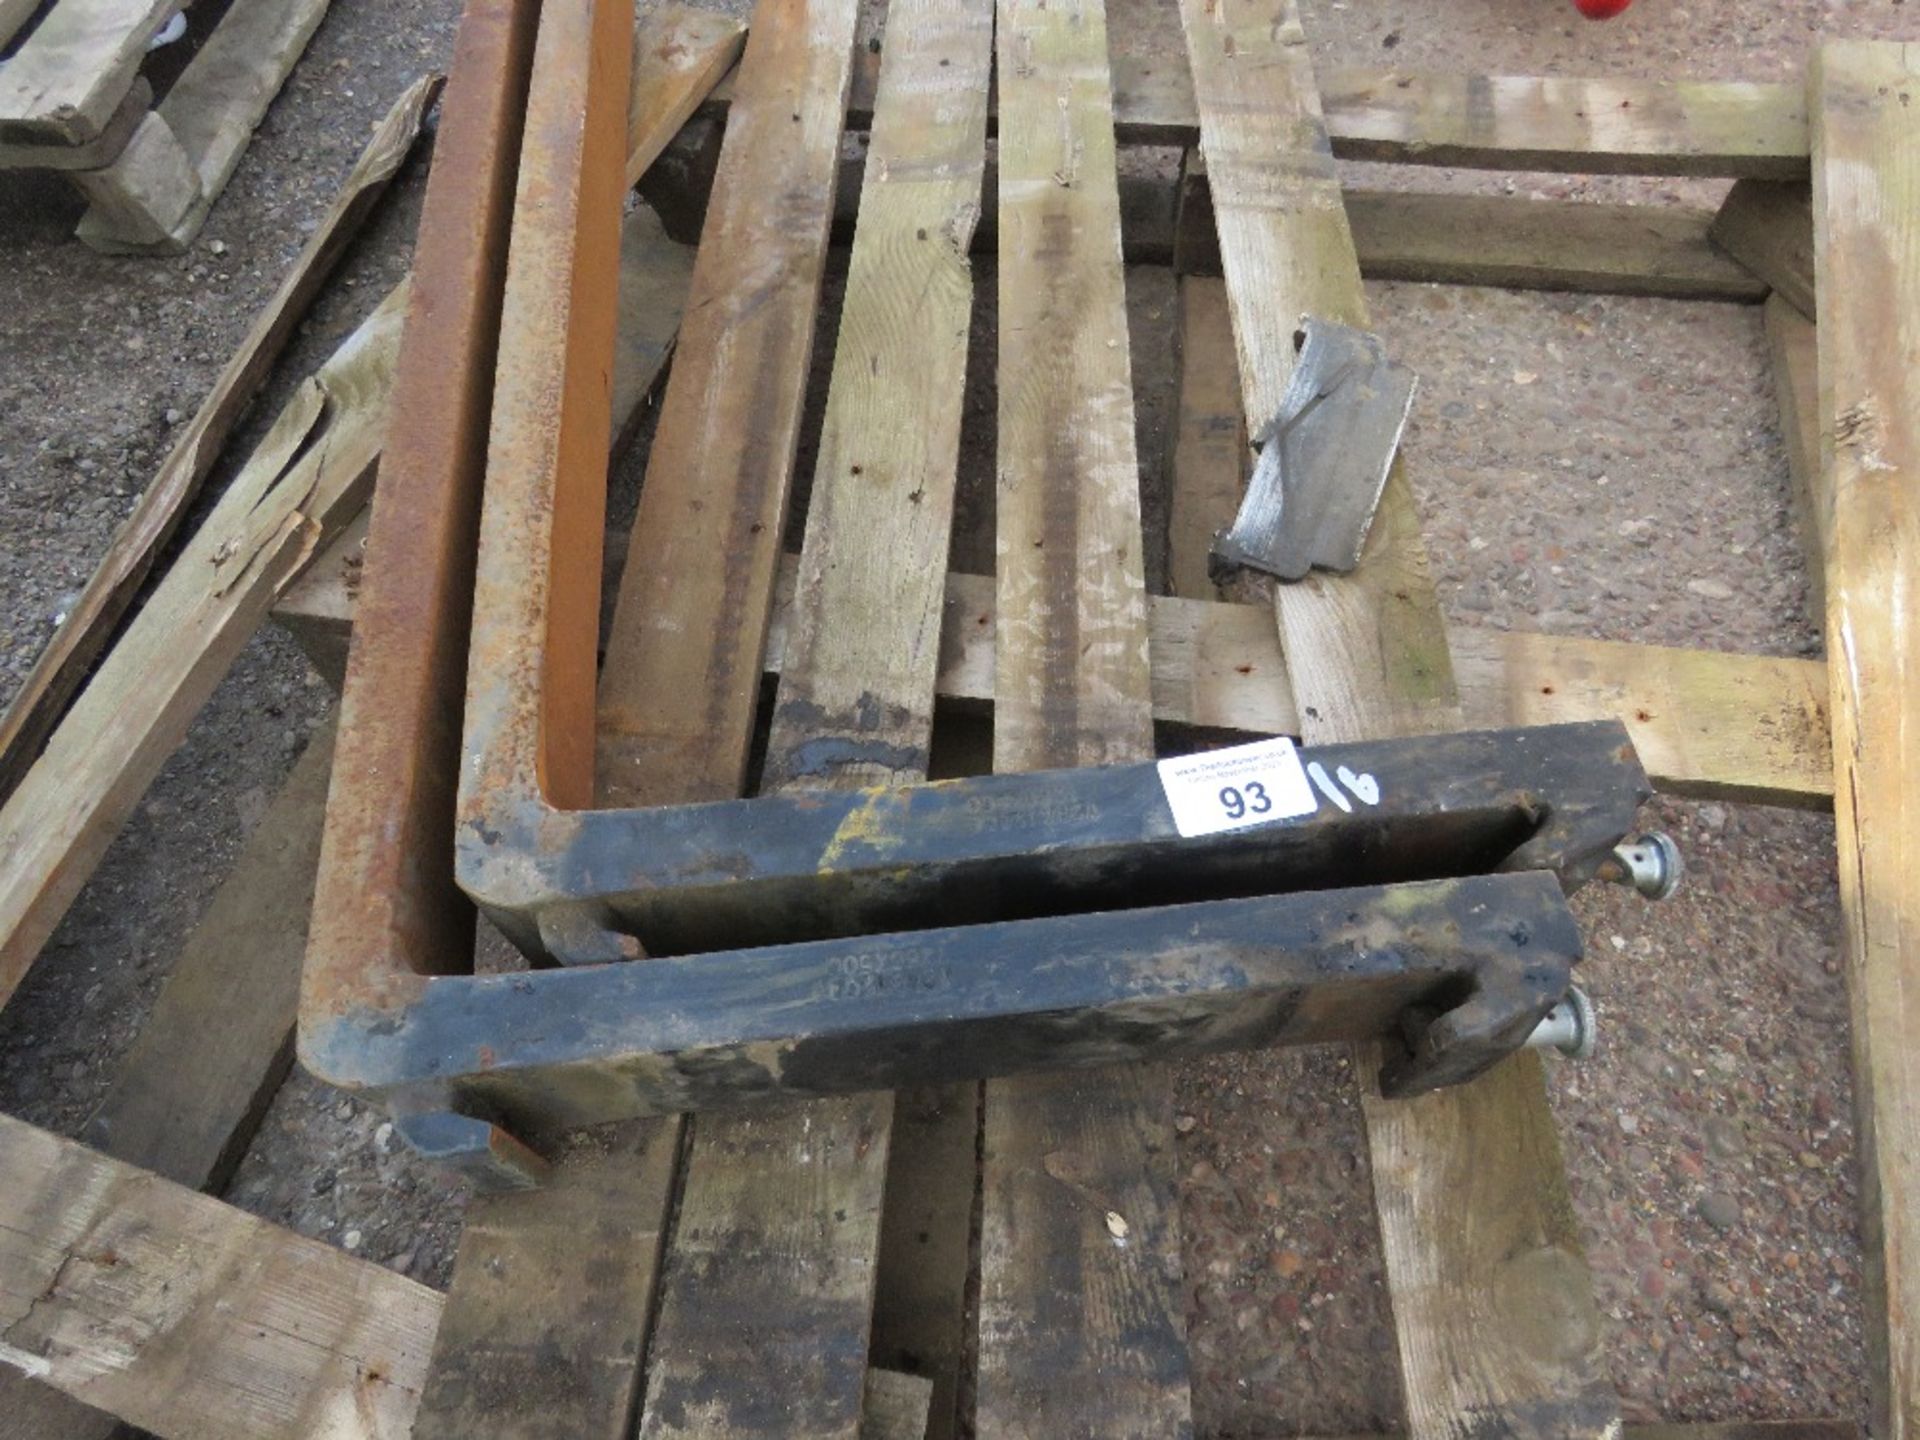 PAIR OF FORKLIFT TINES FOR 16" CARRIAGE. - Image 2 of 3